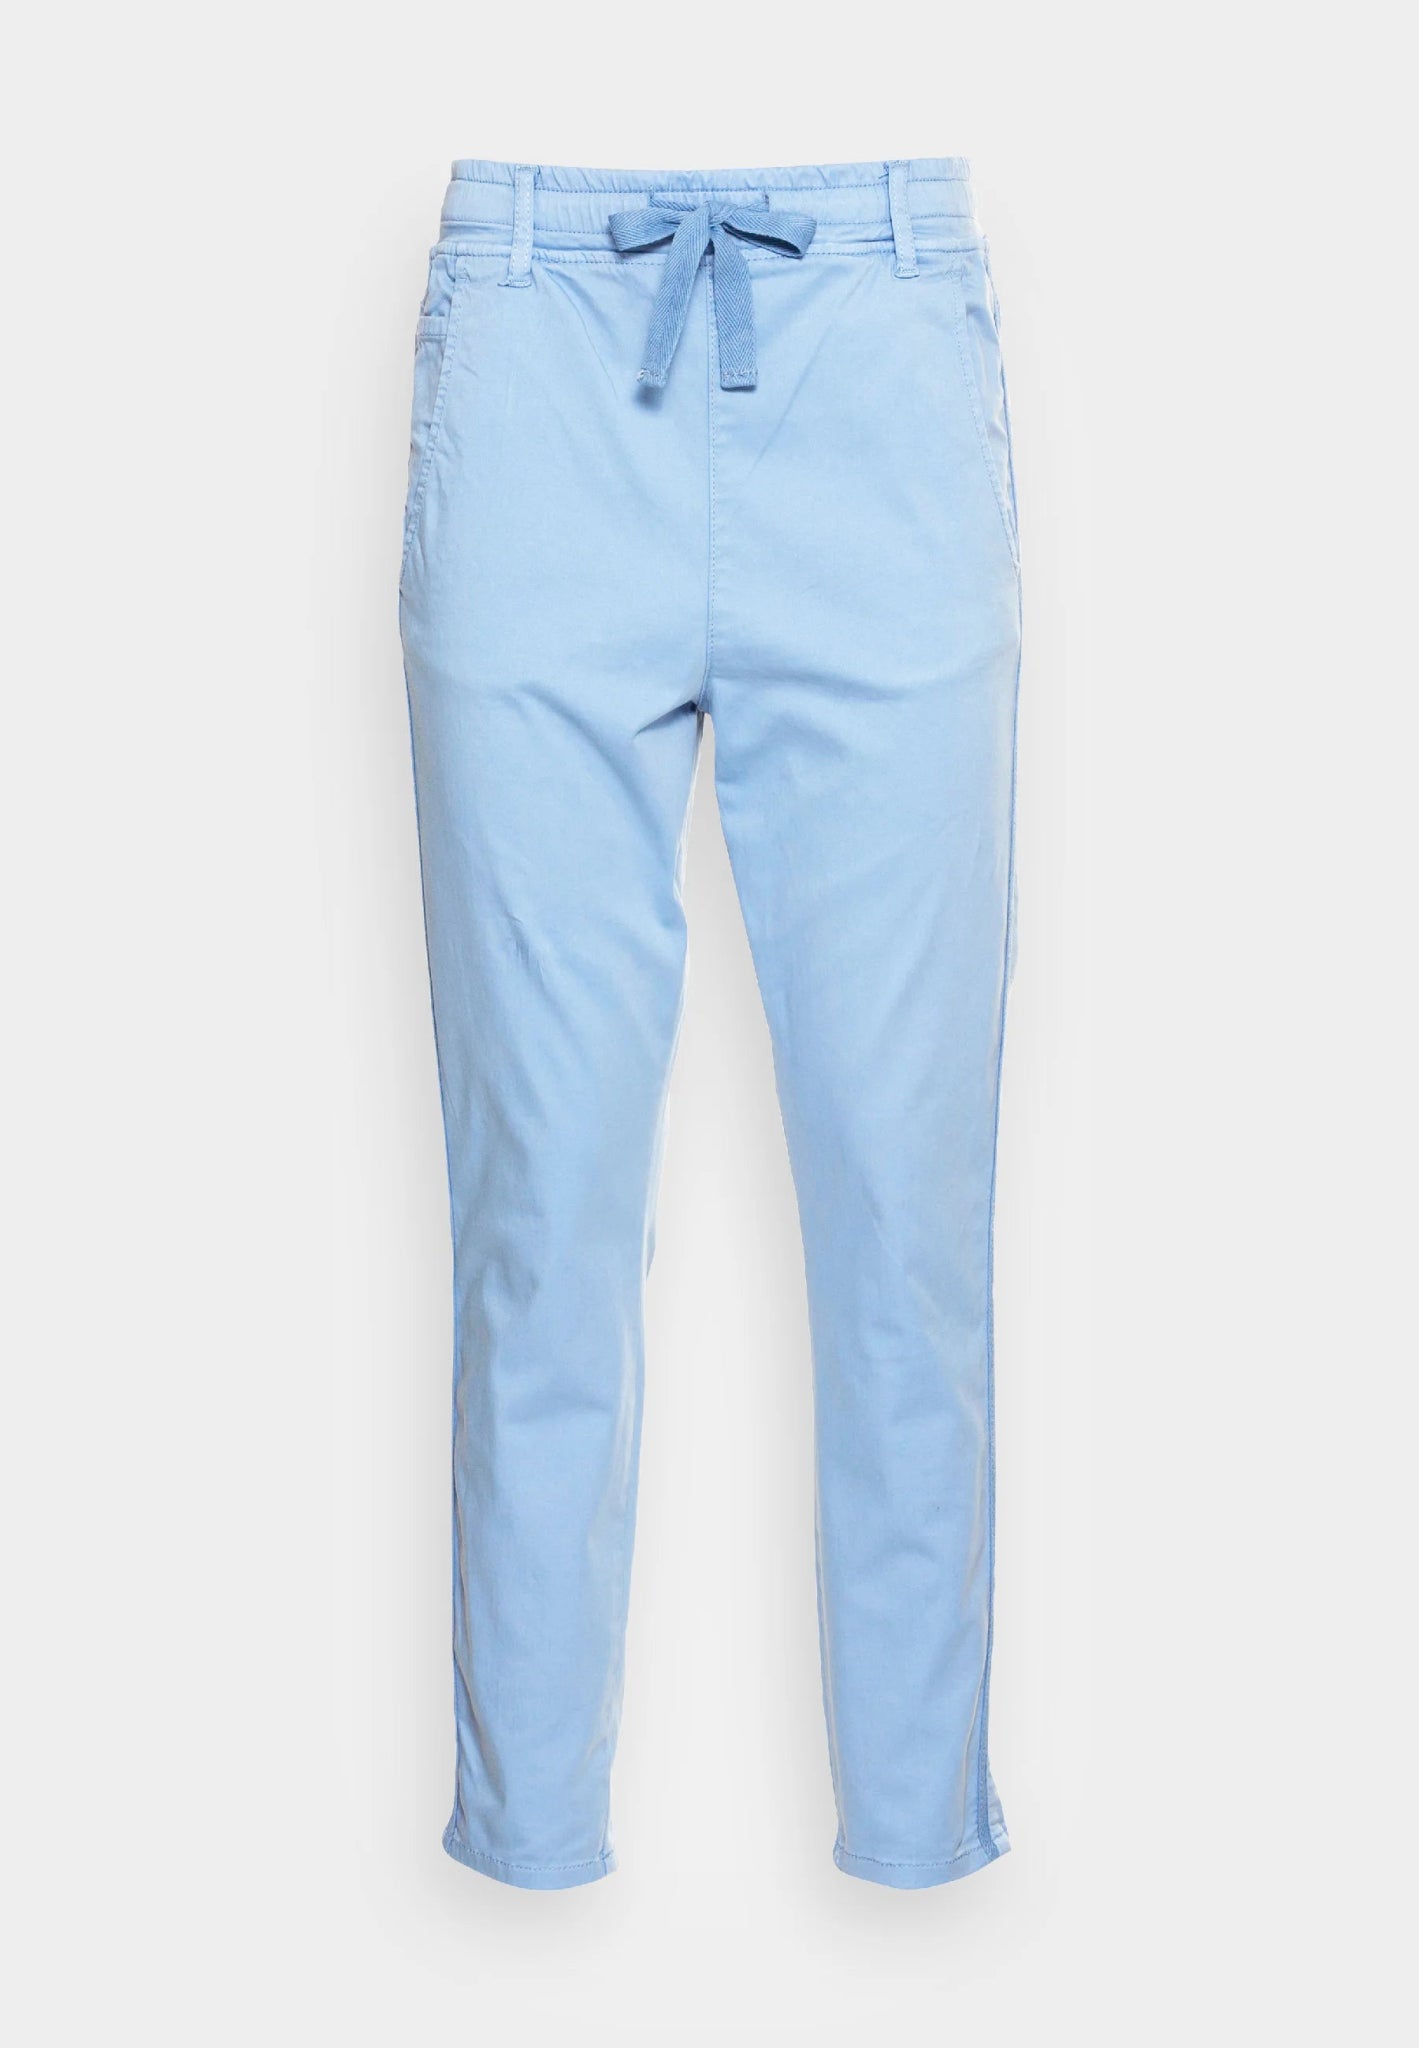 Shop Donne Twill Pant in Placid Blue by Cream - Cream